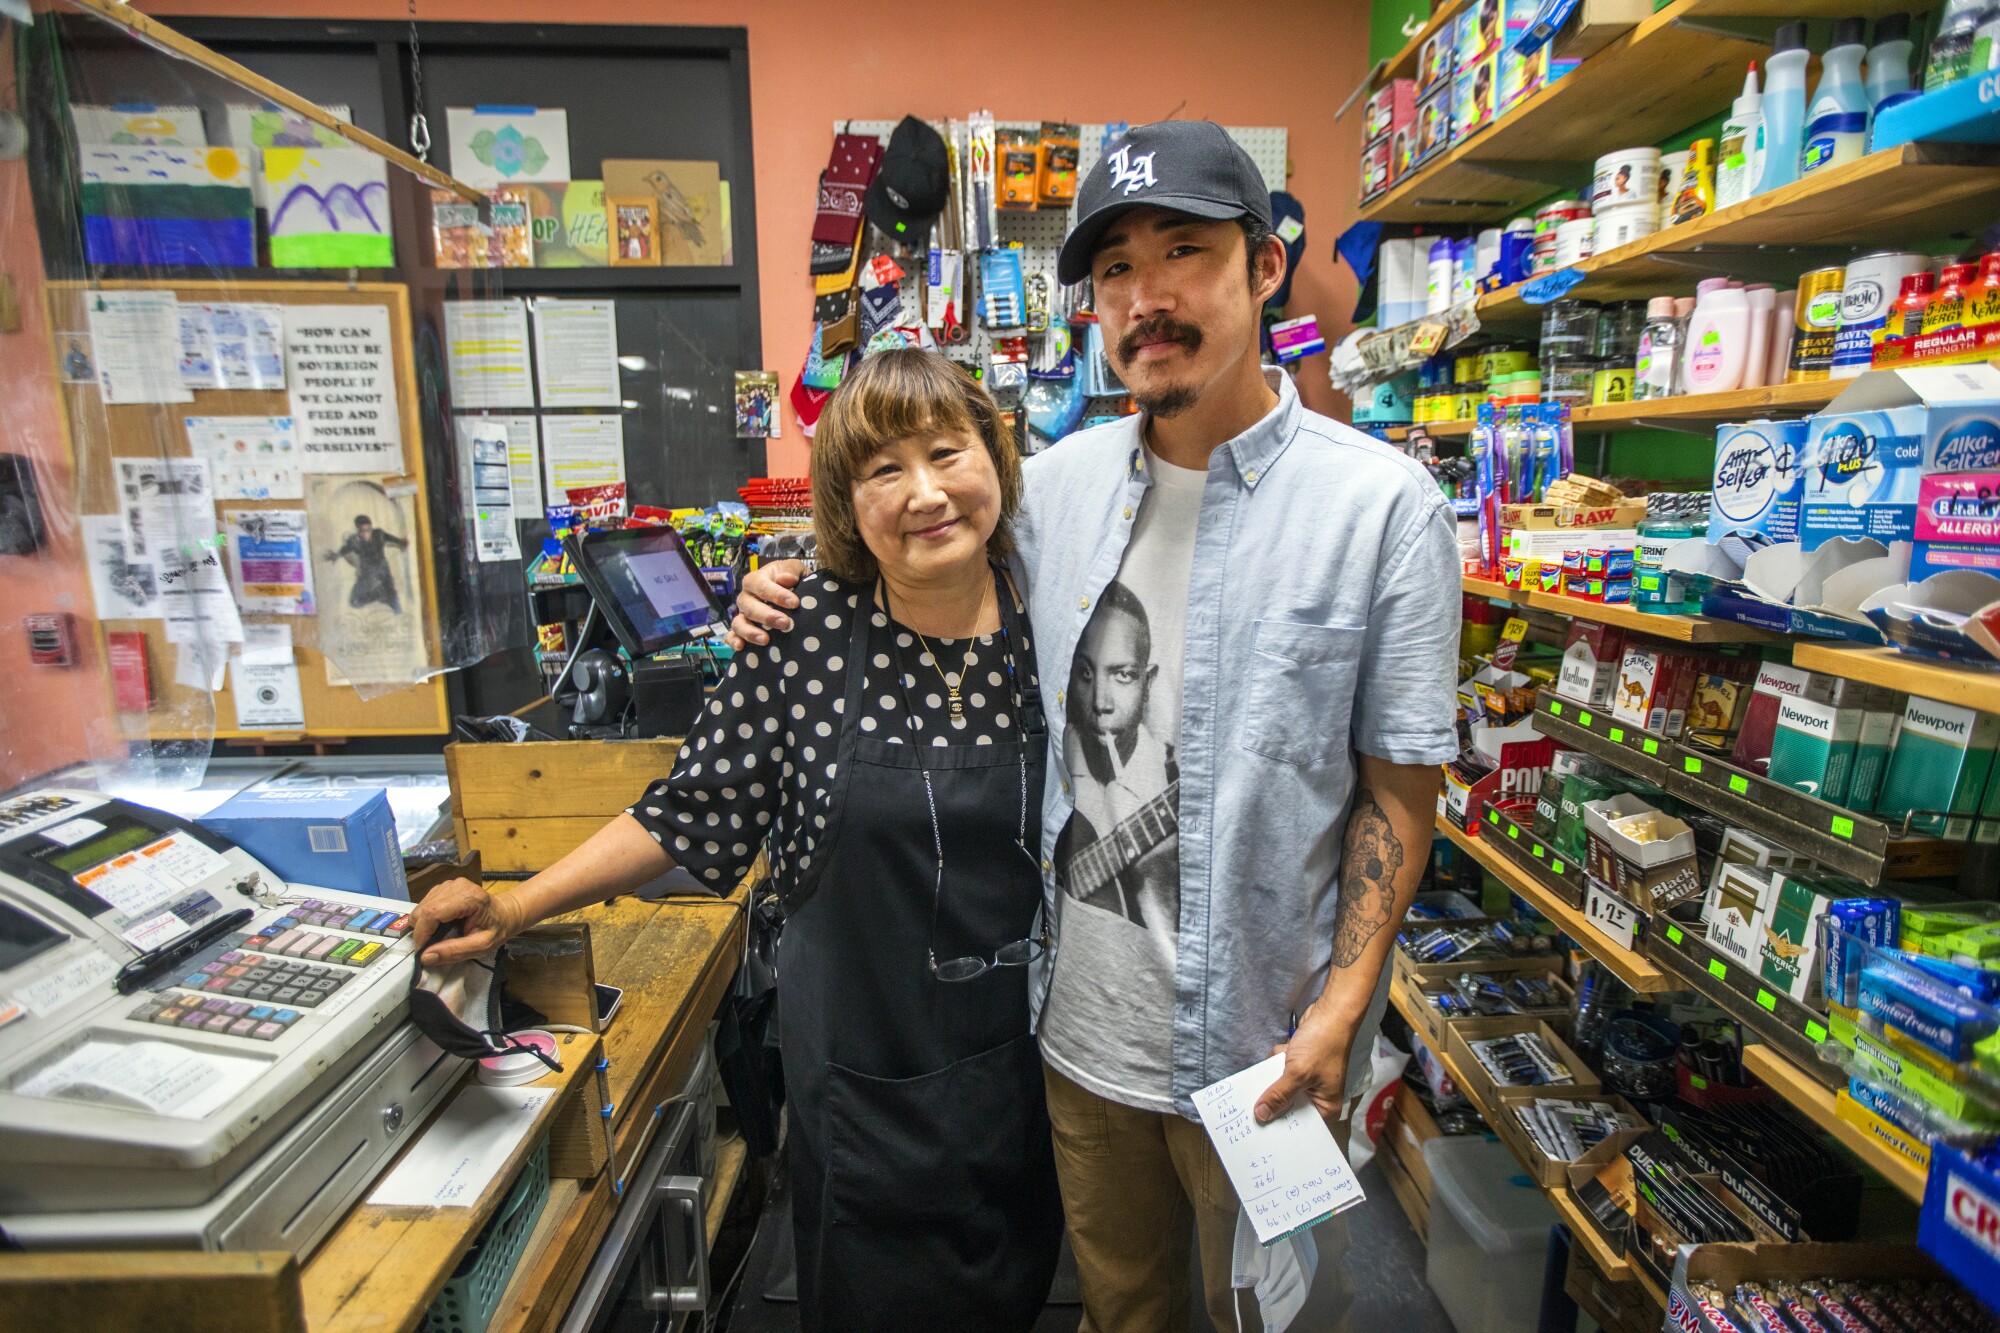 May Park, left, with her son Danny Park, at the Skid Row People's Market in Los Angeles, CA. 